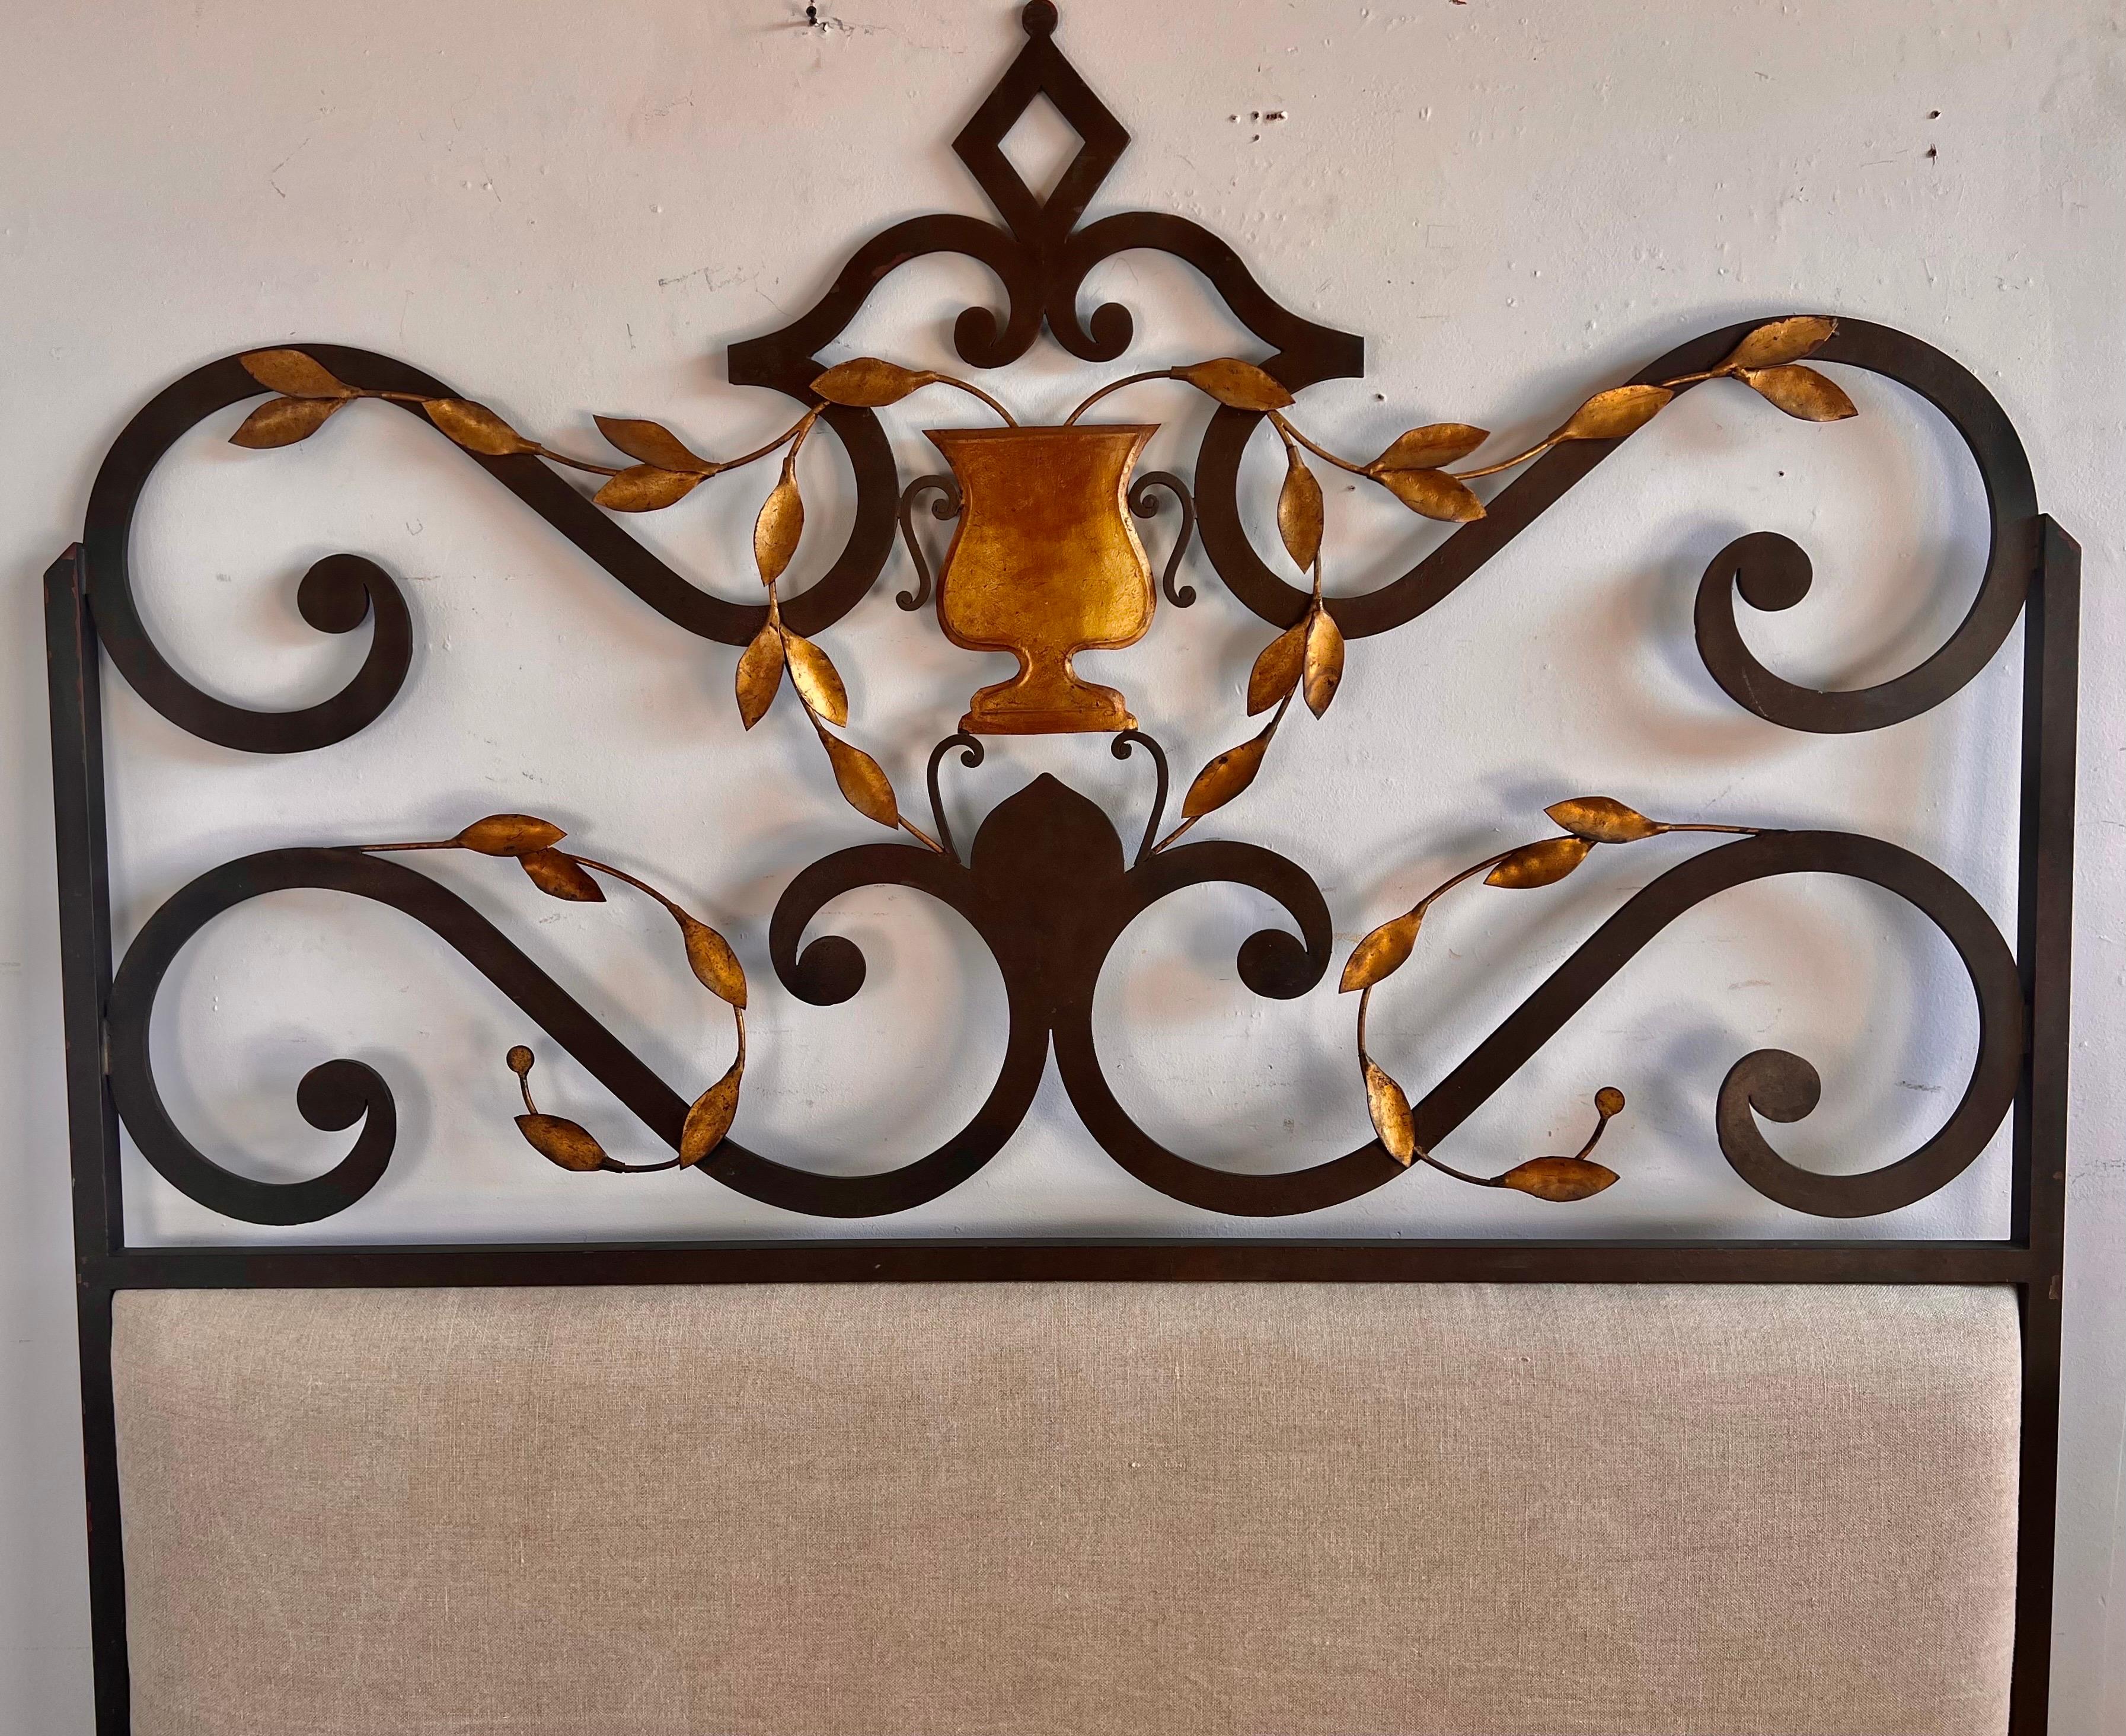 King size Spanish wrought iron headboard with a gold leaf urn & gold leaf leaves depicted in the center of the design. The headboard was newly upholstered with a washed Belgium linen in a natural oatmeal coloration.